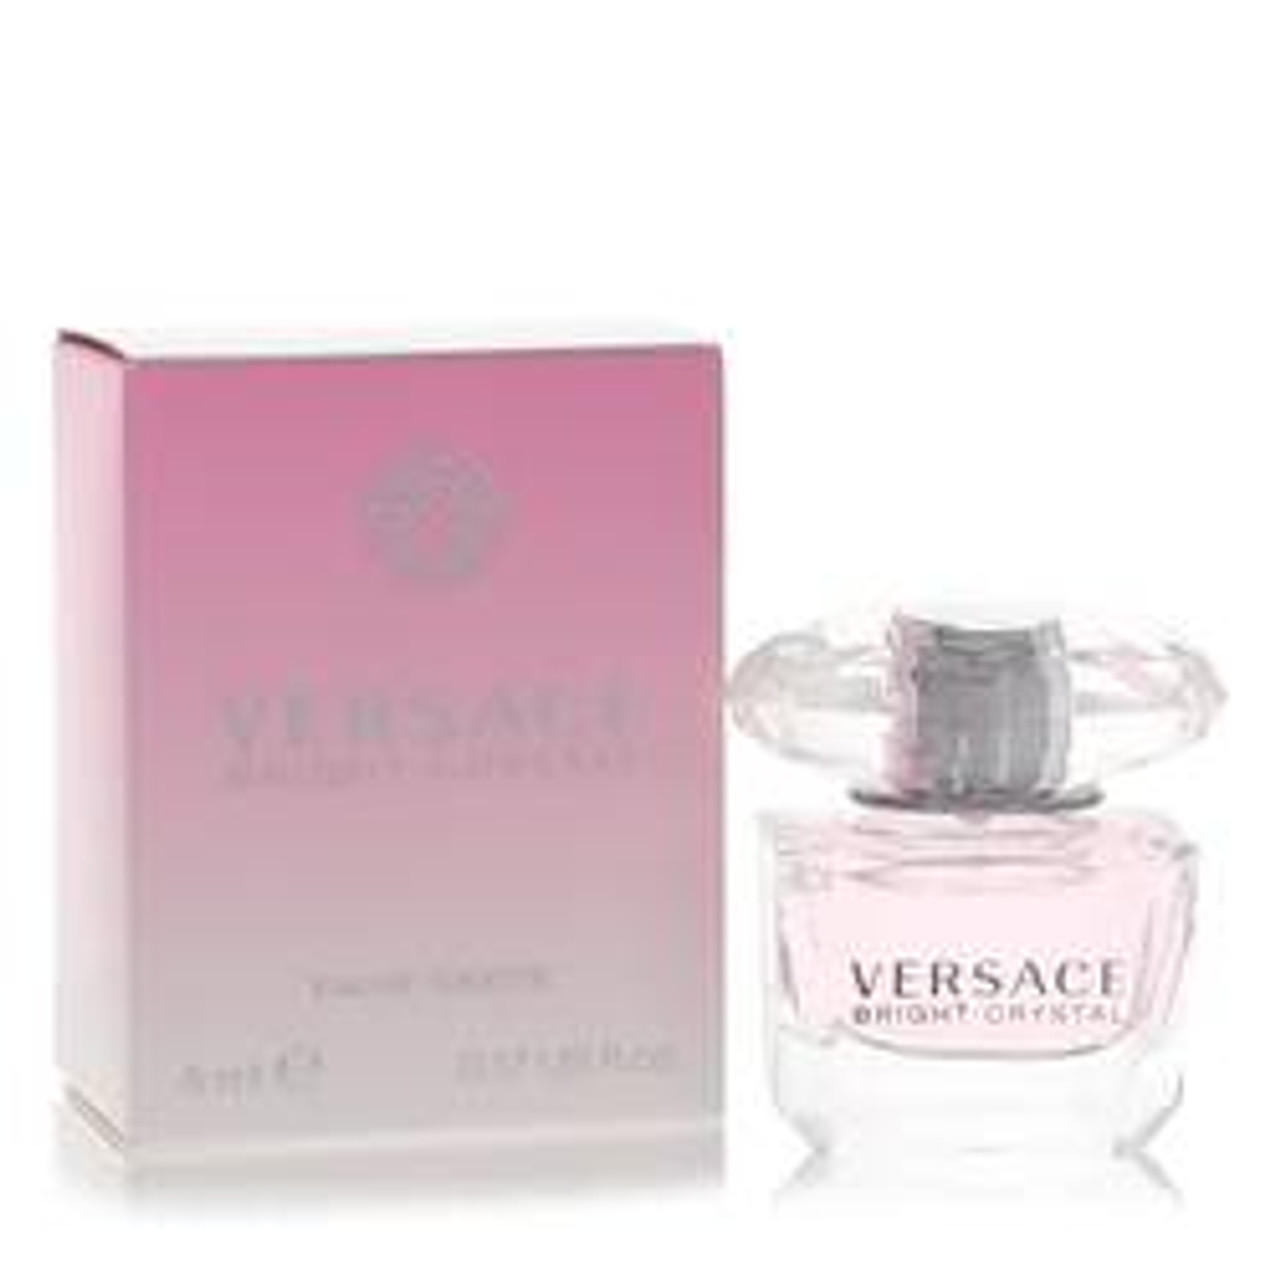 Bright Crystal Perfume By Versace Mini EDT 0.17 oz for Women - [From 27.00 - Choose pk Qty ] - *Ships from Miami